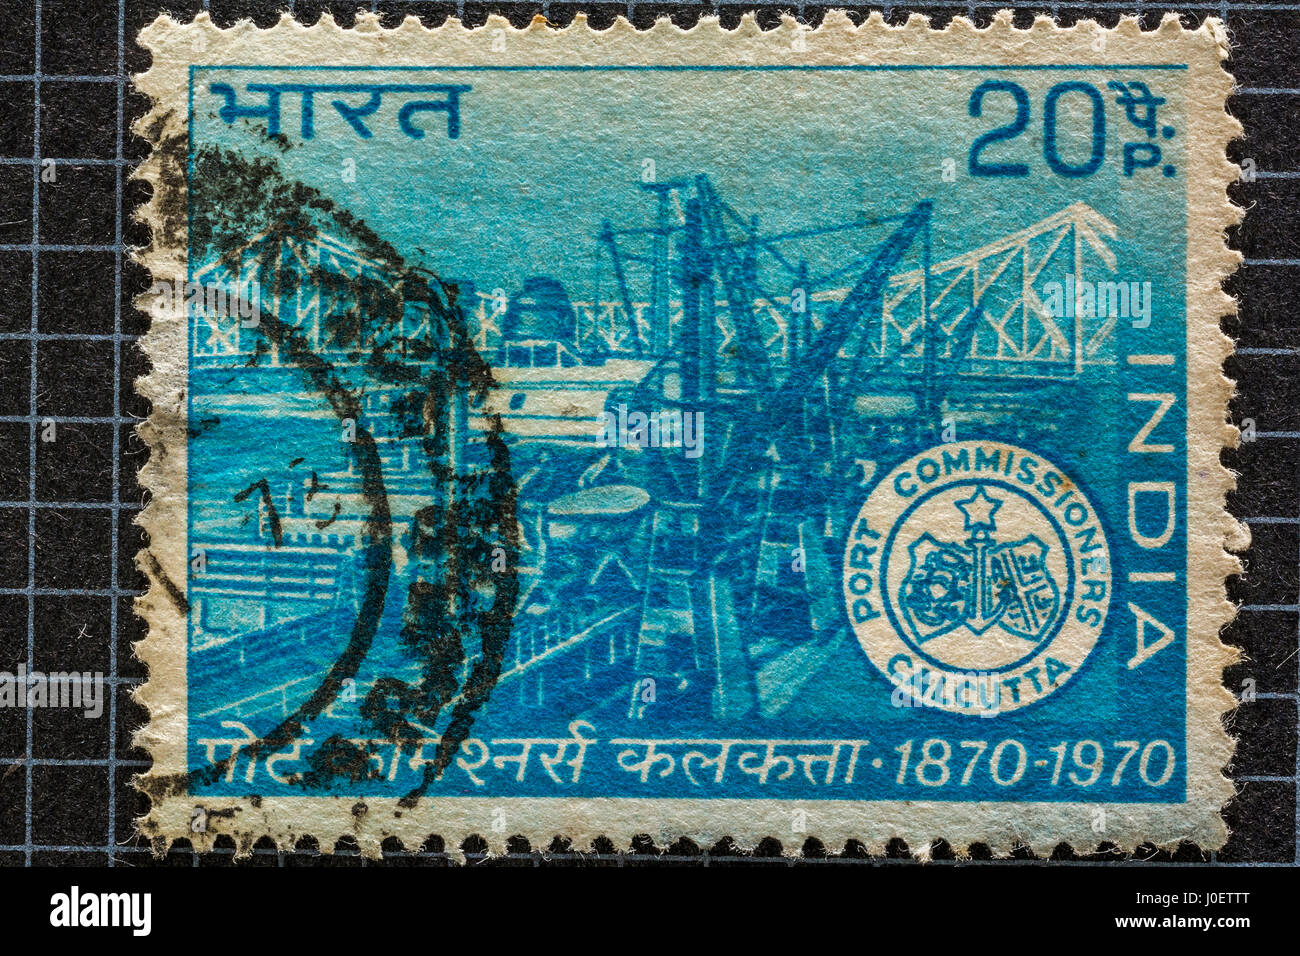 Port commissioners, calcutta, postage stamps, india, a Stock Photo